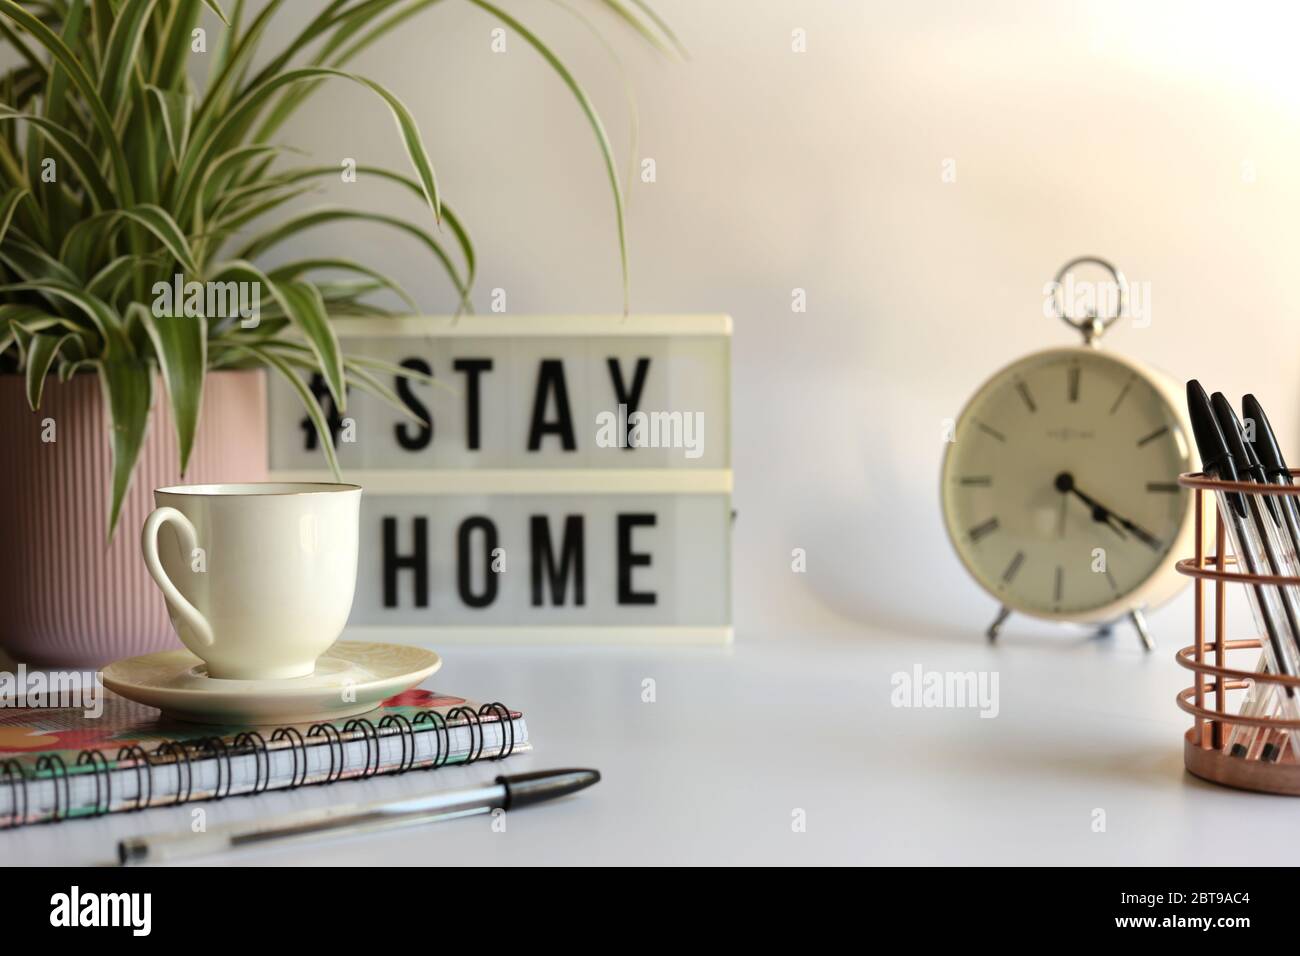 Home office desc concept during self quarantine as preventive measure against virus. Stay safe concept. Cup of coffee, clock, stationary, home plant on white background Stock Photo